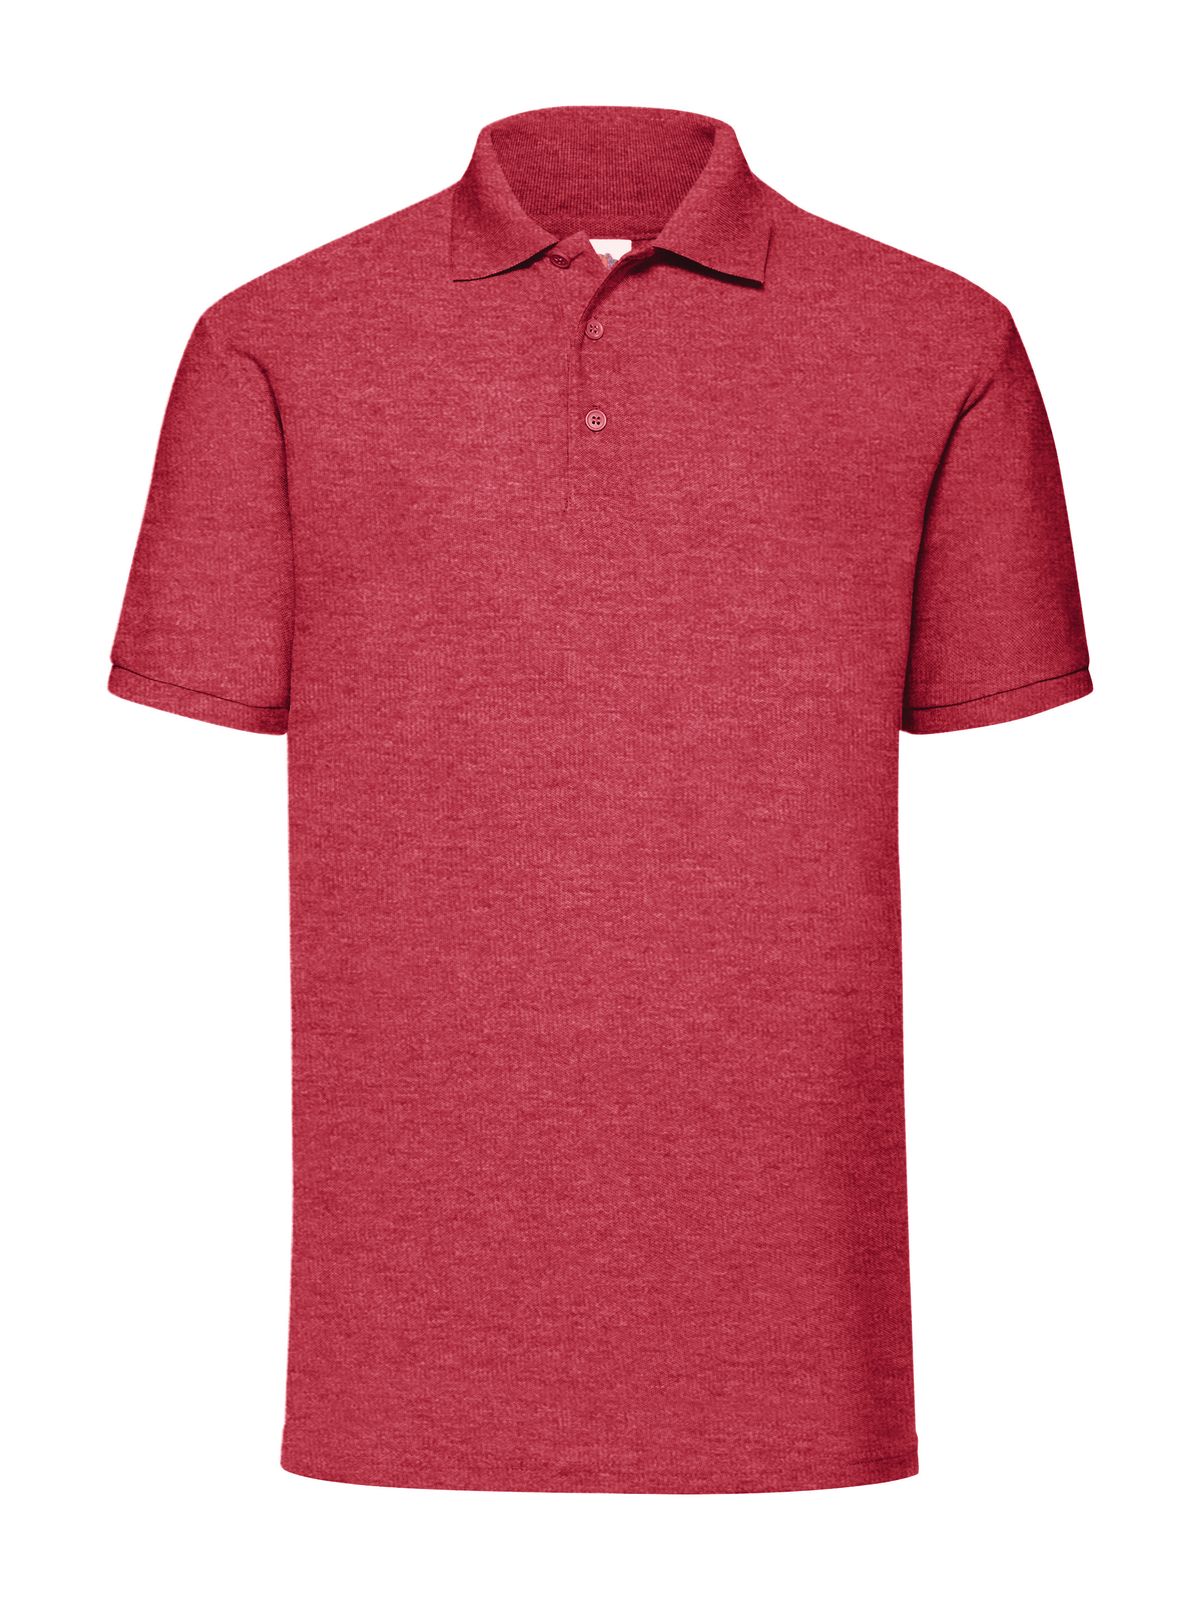 65-35-polo-vintage-heather-red.webp